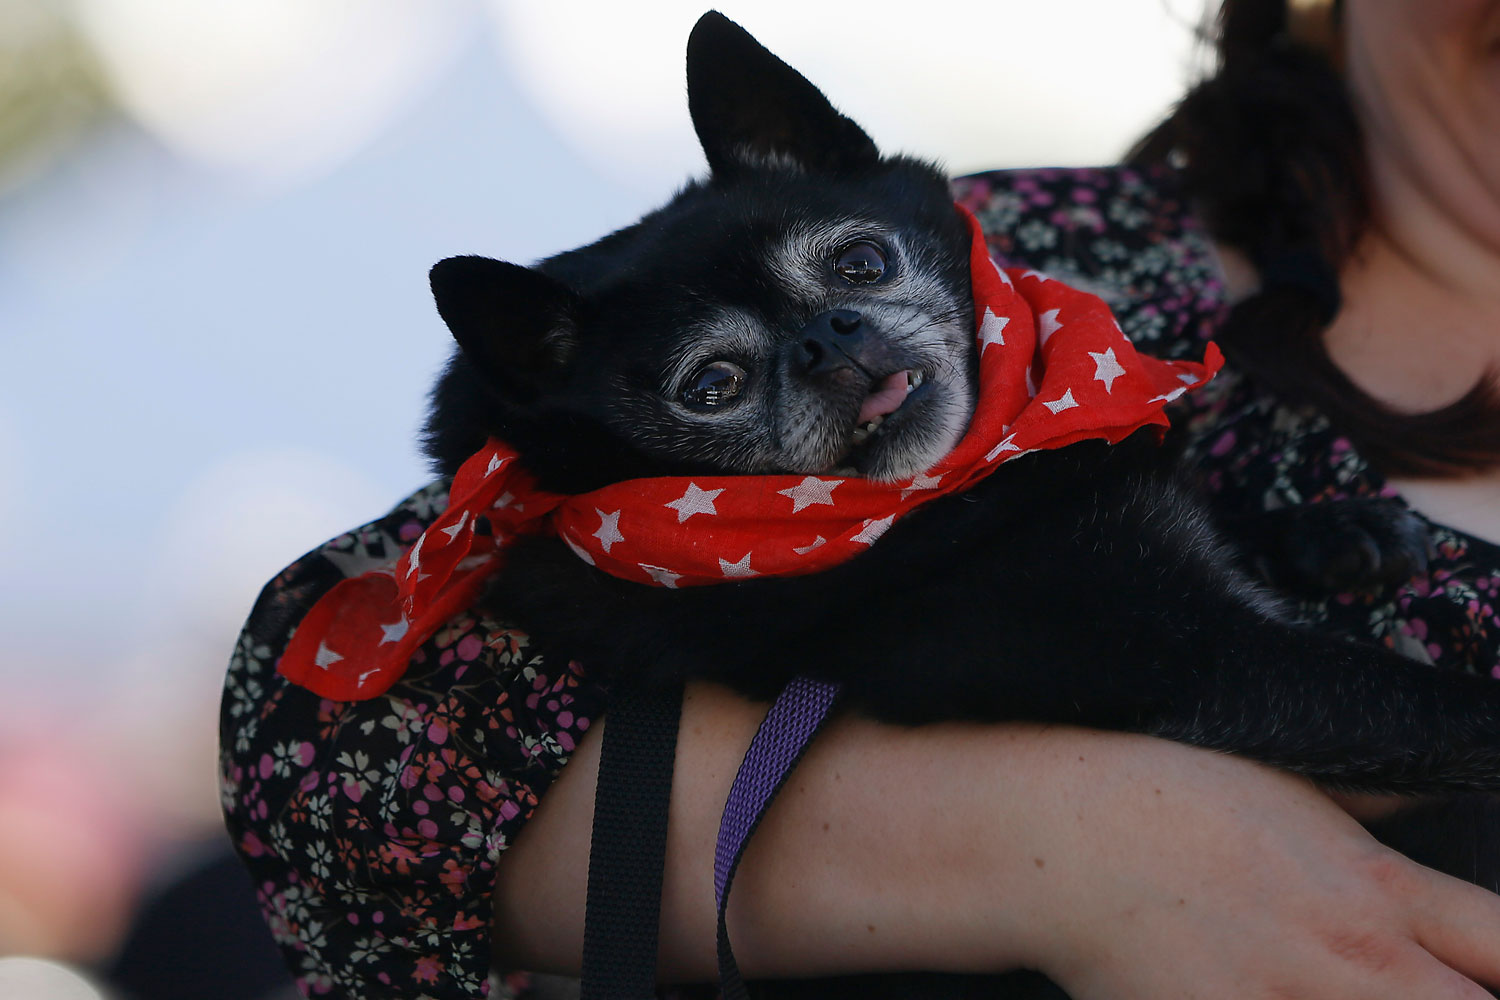 Prince Austin, a Pug Pomeranian mix, is presented during the 2014 World's Ugliest Dog contest in Petaluma